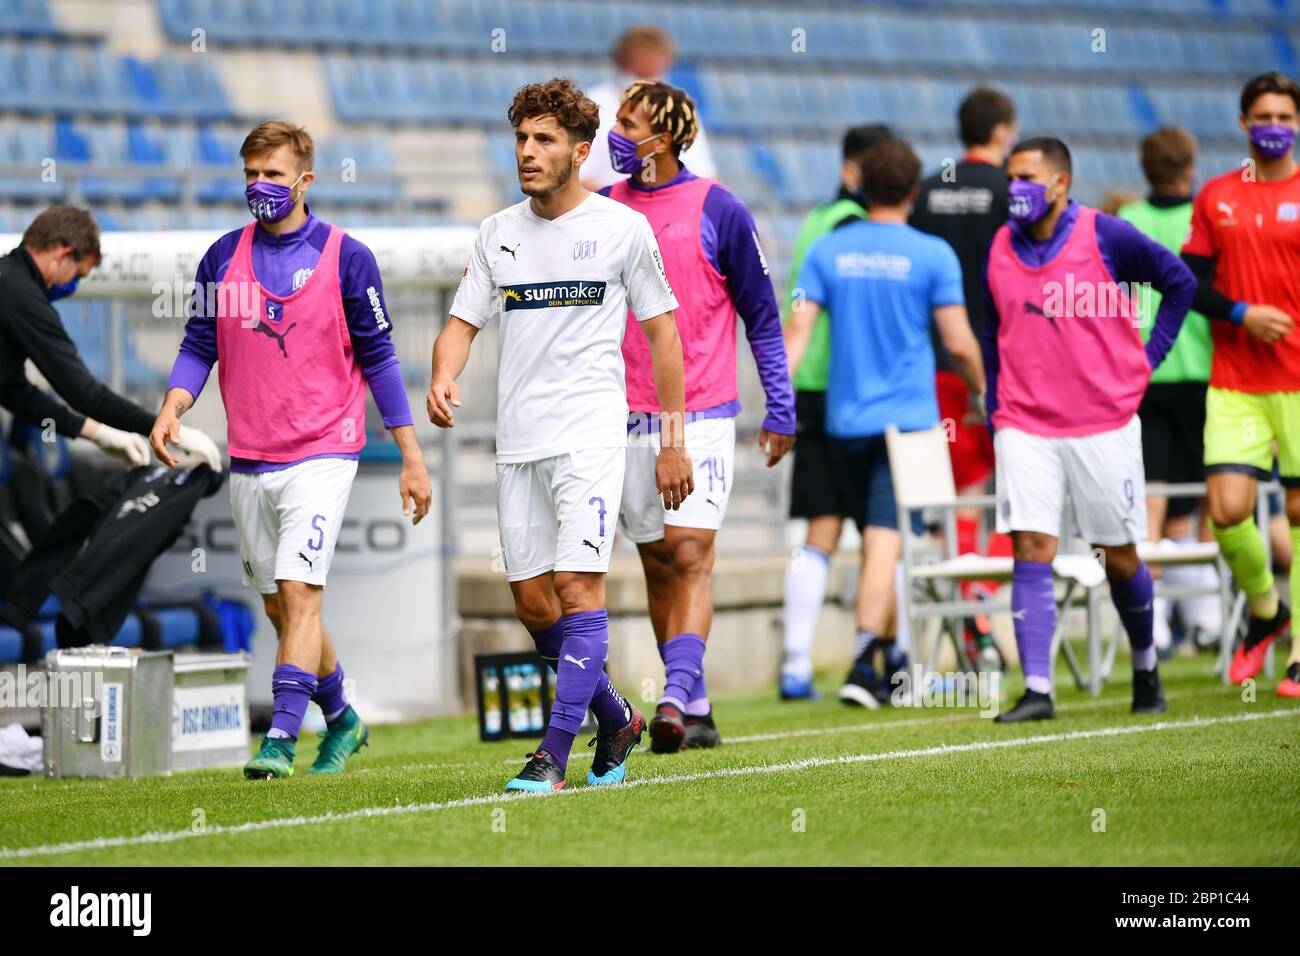 FILED - 17 May 2020, North Rhine-Westphalia, Bielefeld: Football, 2nd Bundesliga, DSC Arminia Bielefeld - VfL Osnabrück, 26th matchday, Schüco-Arena: Bashkim Ajdini (3rd from left) from Osnabrück leaves the pitch at half-time. After a 65-day corona break, the ball is rolling again in the Bundesliga. The matches take place without spectators. Photo: Stuart Franklin/Getty/POOL/dpa - IMPORTANT NOTE: In accordance with the regulations of the DFL Deutsche Fußball Liga and the DFB Deutscher Fußball-Bund, it is prohibited to exploit or have exploited in the stadium and/or from the game taken photogra Stock Photo